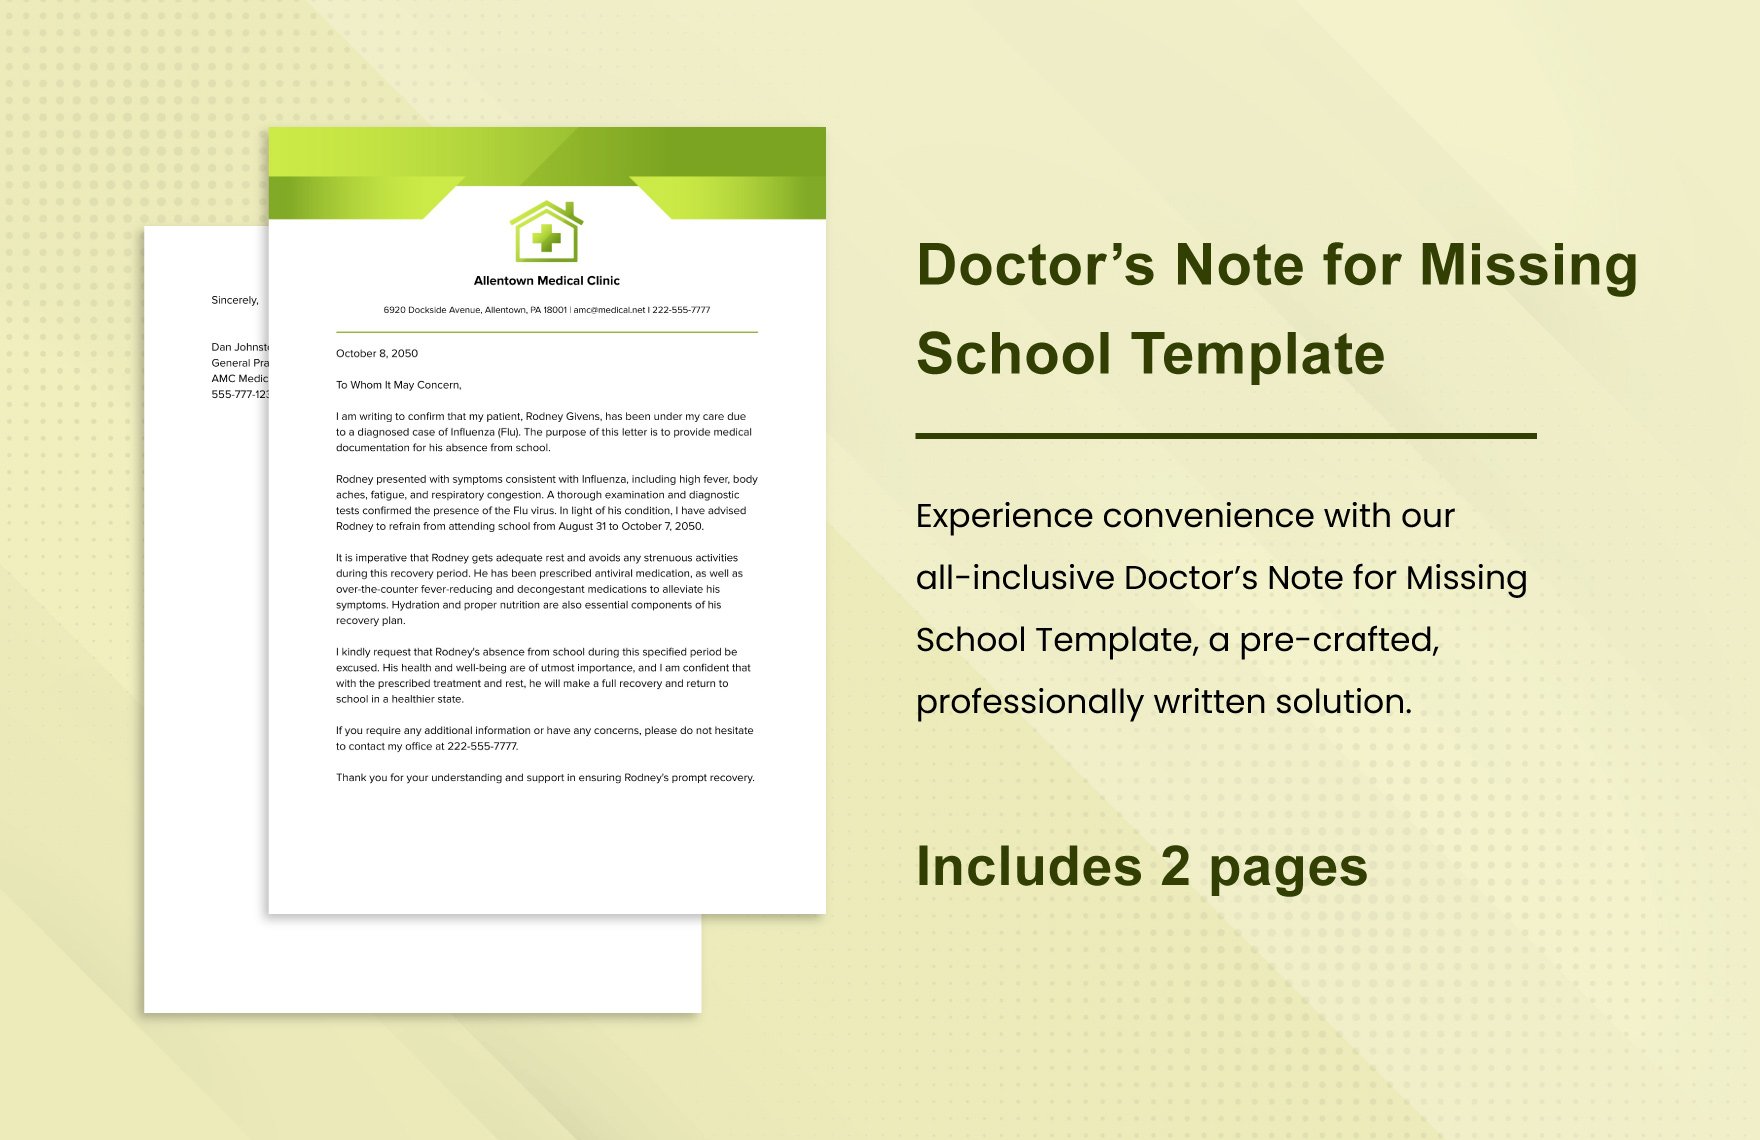 Doctor’s Note for Missing School Template